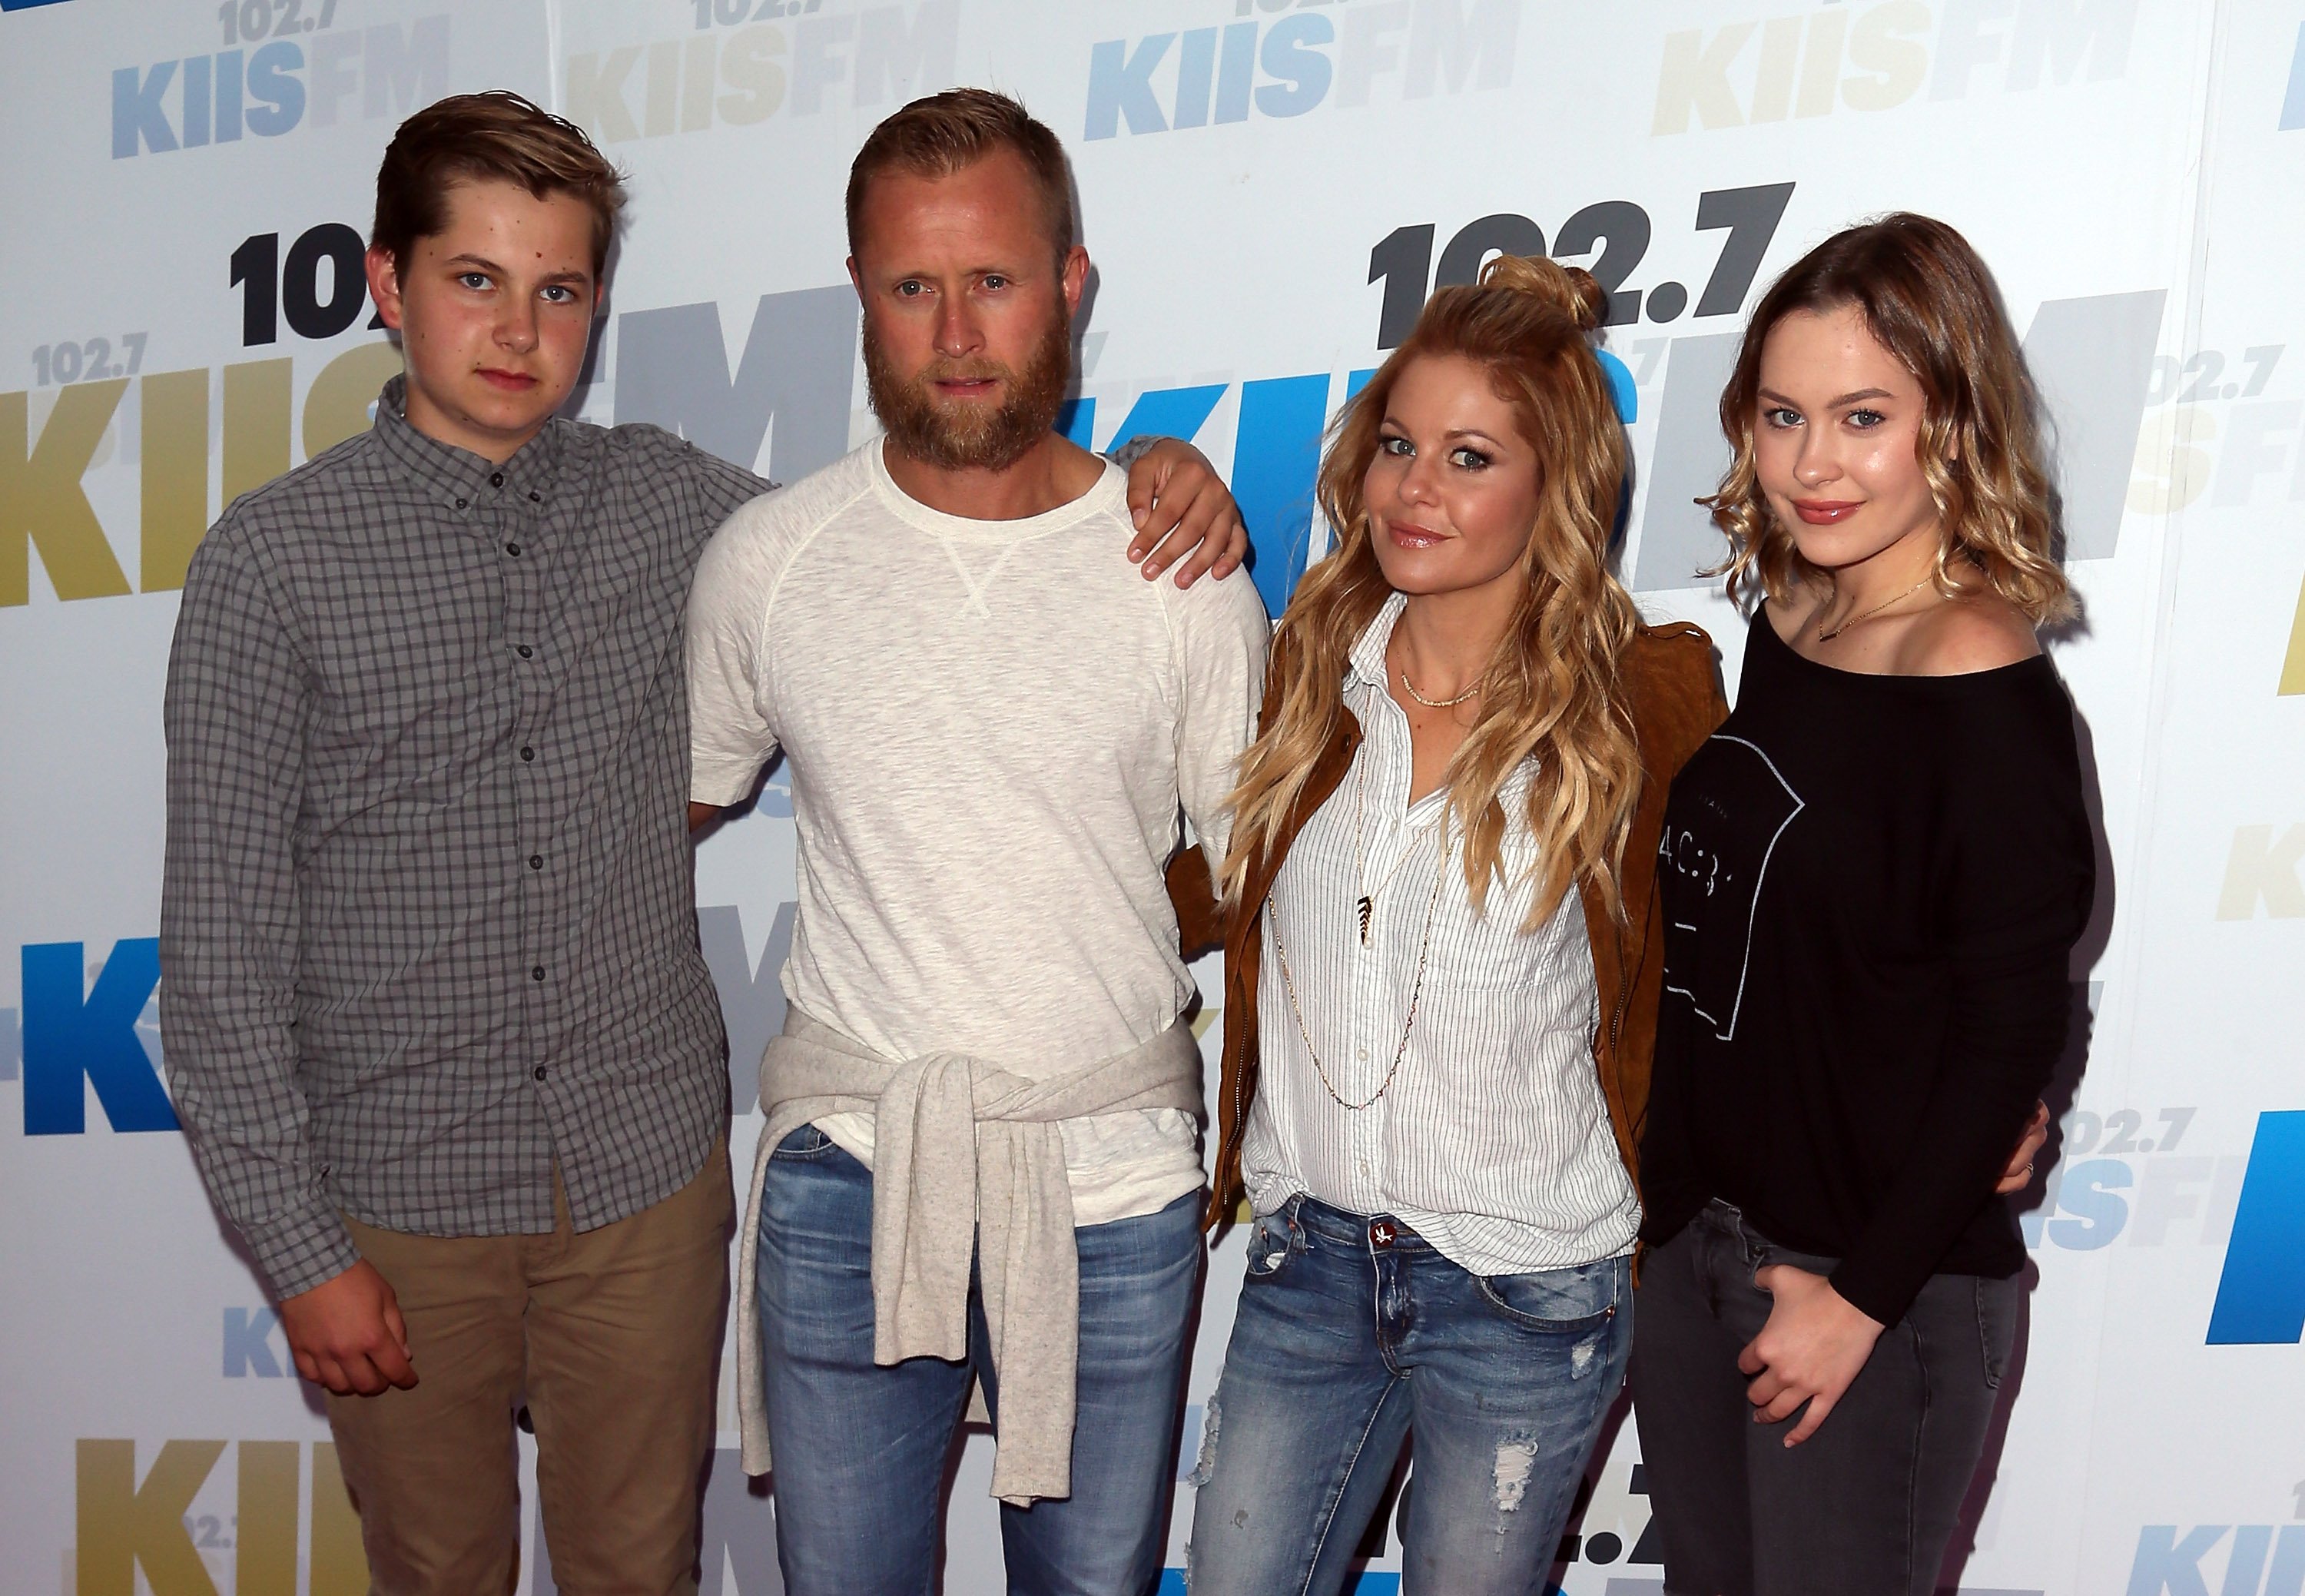 Former NHL player Valeri Bure (LC), actress Candace Cameron-Bure (RC) and their children attend 102.7 KIIS FM's 2016 Wango Tango at StubHub Center on May 14, 2016 in Carson, California. | Source: Getty Images